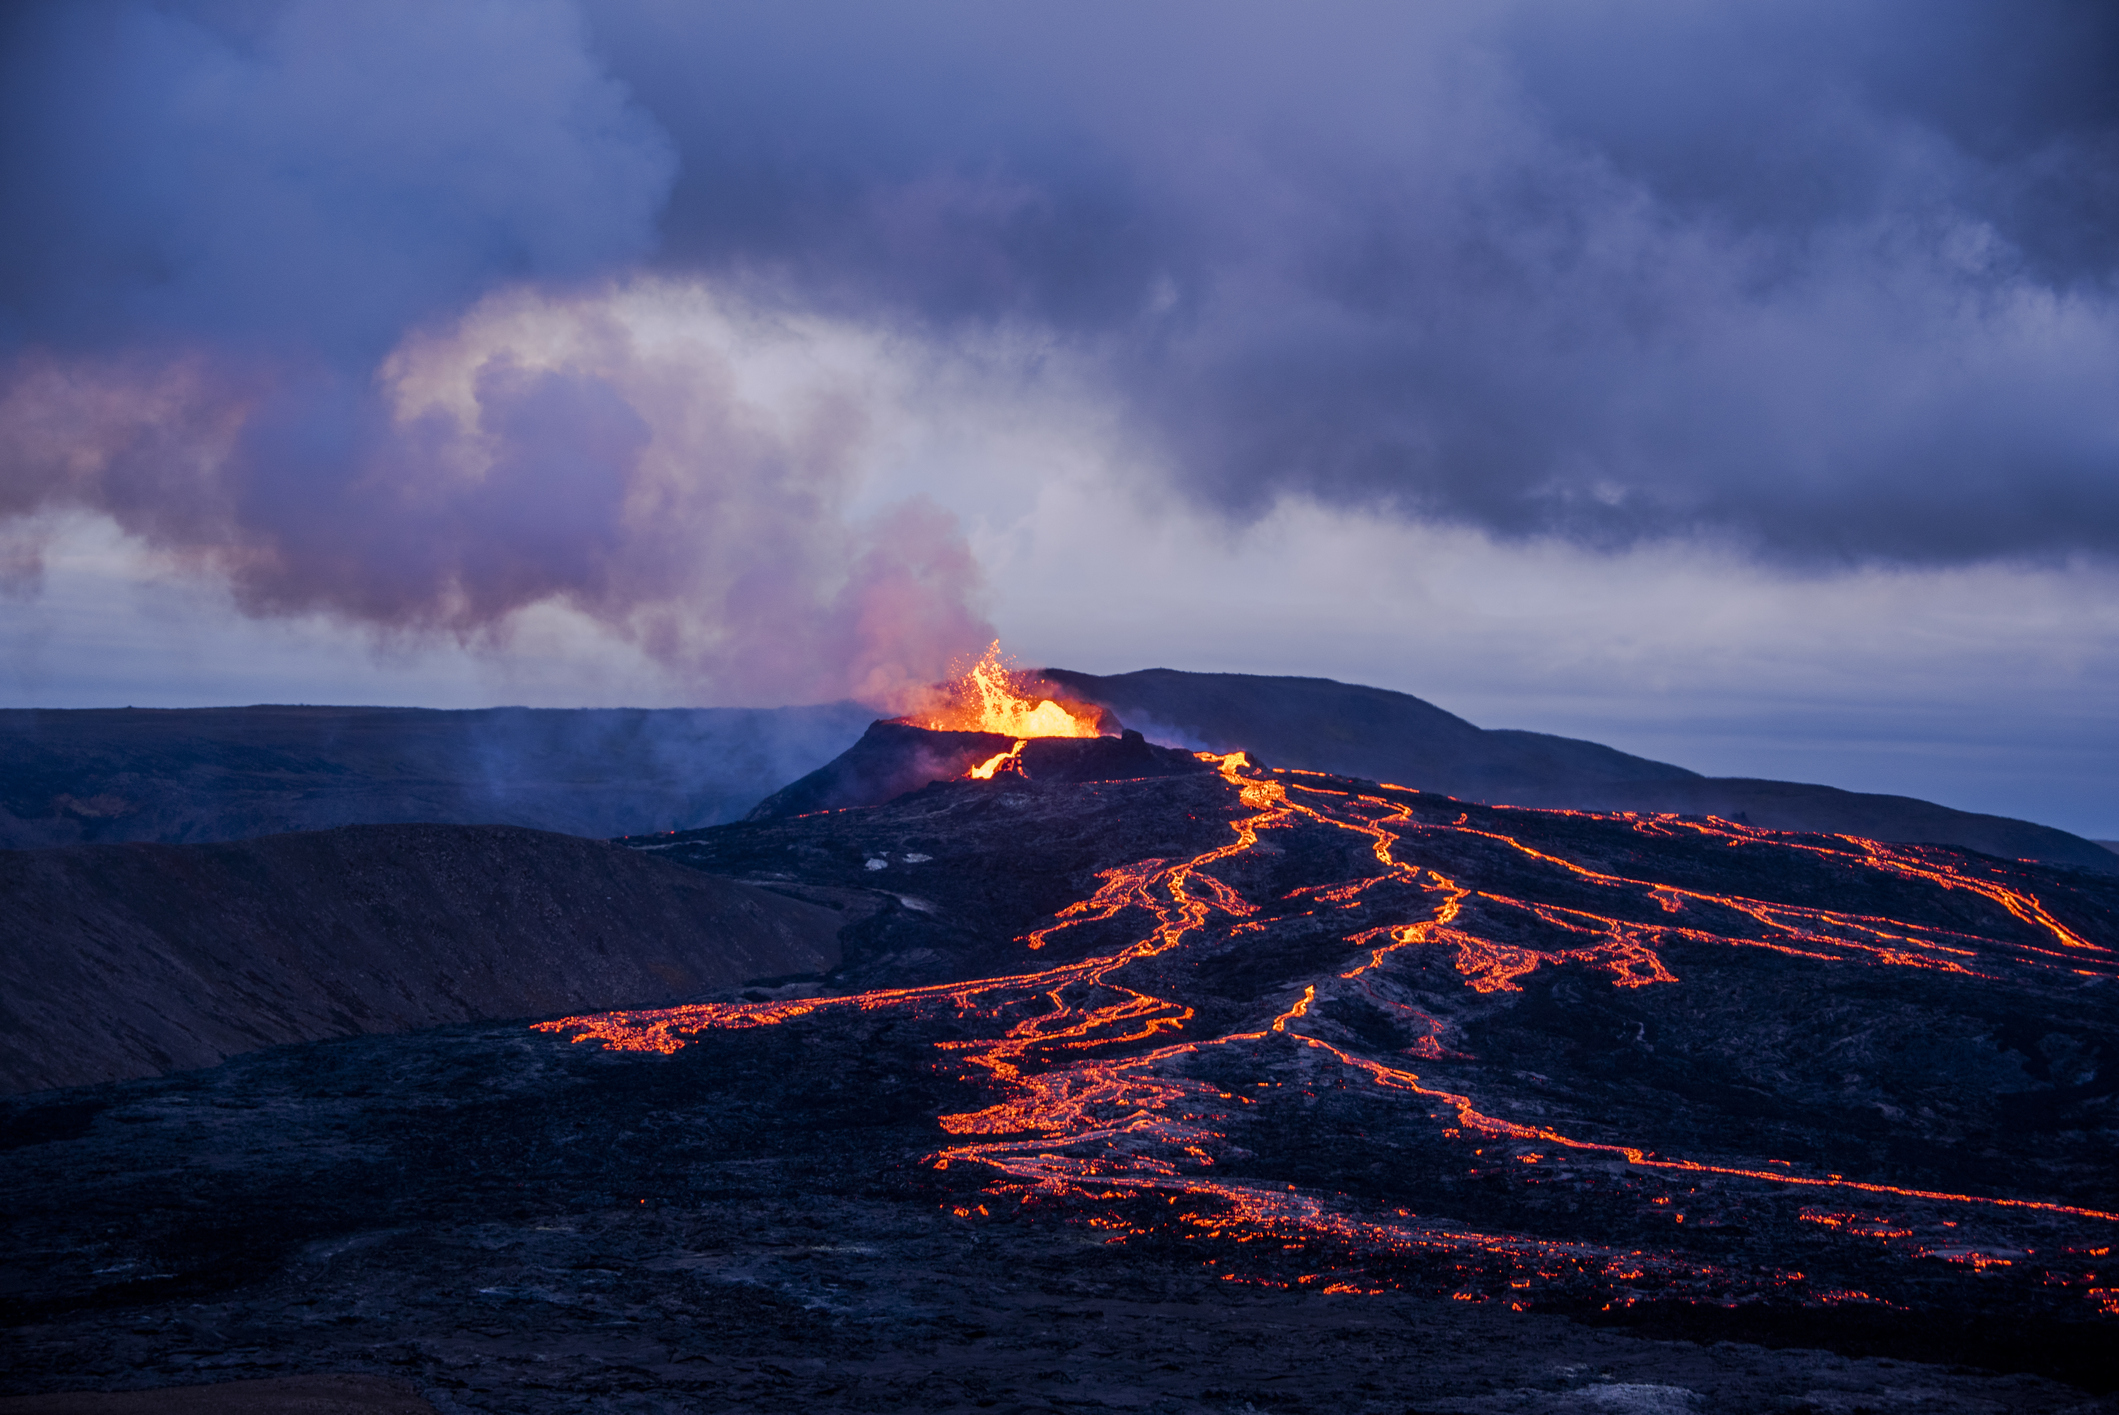 Lava flows and the erupting Eyjafjallajökull at dusk.